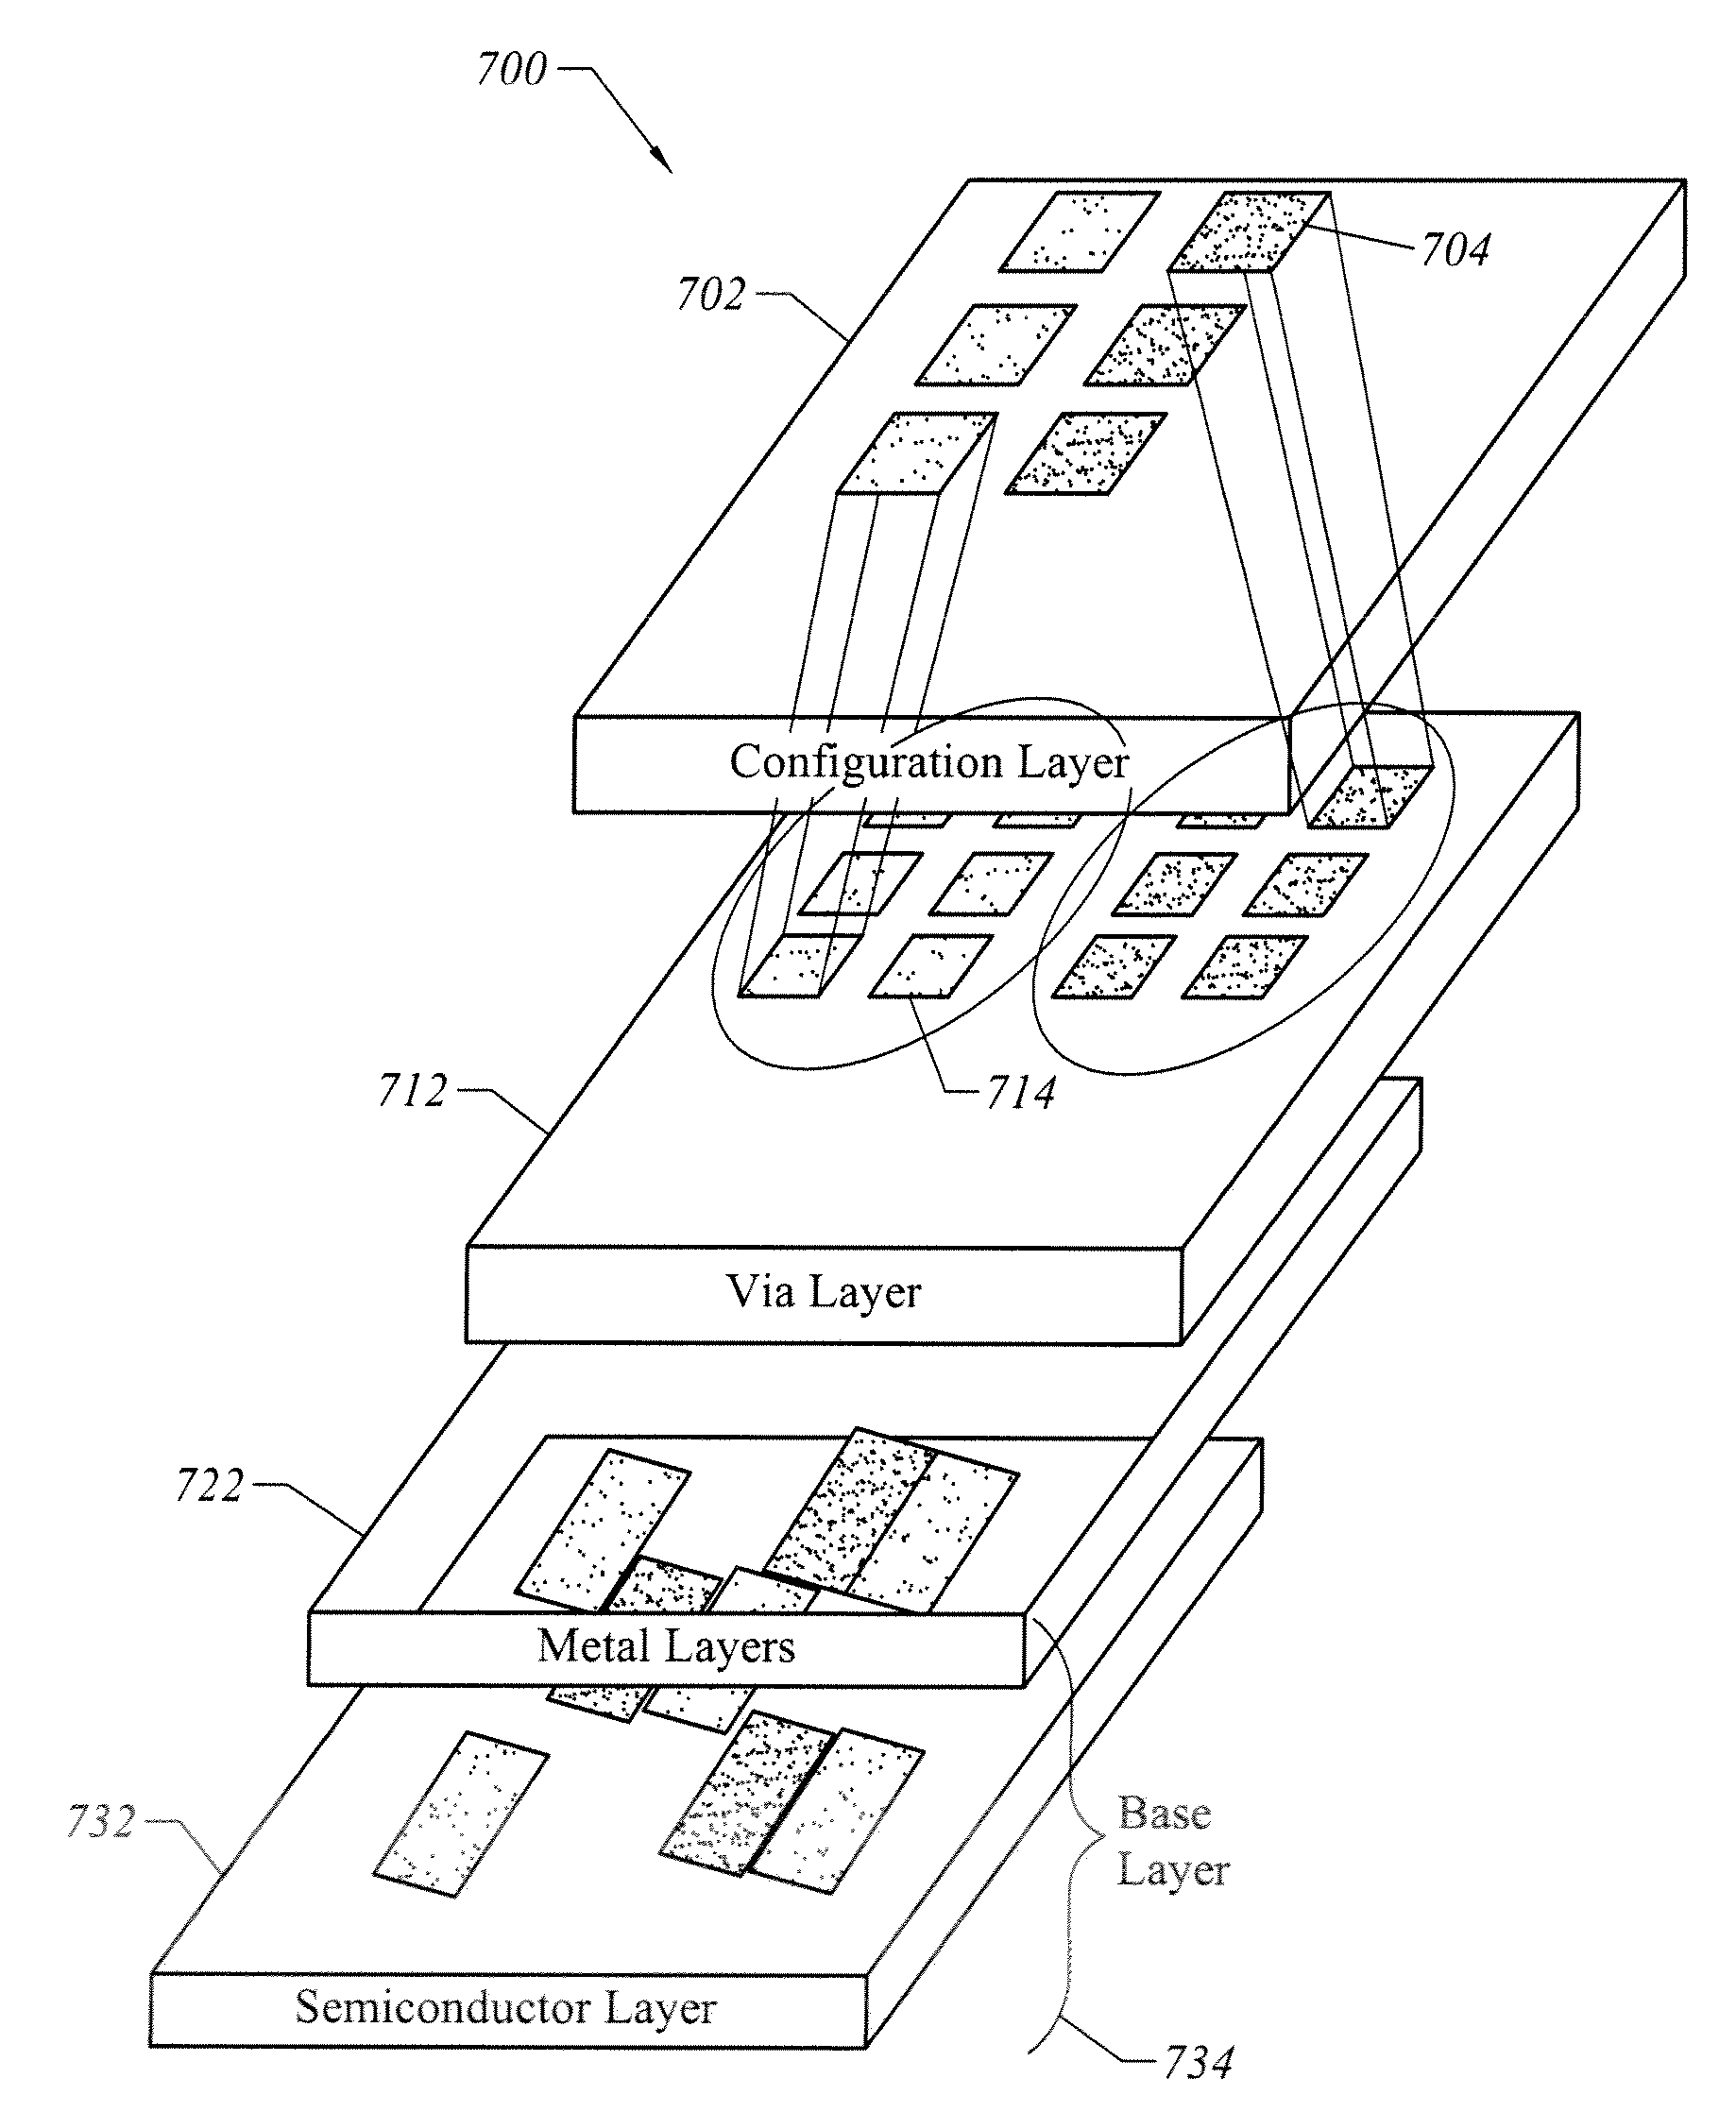 Cells of a customizable logic array device having independently accessible circuit elements